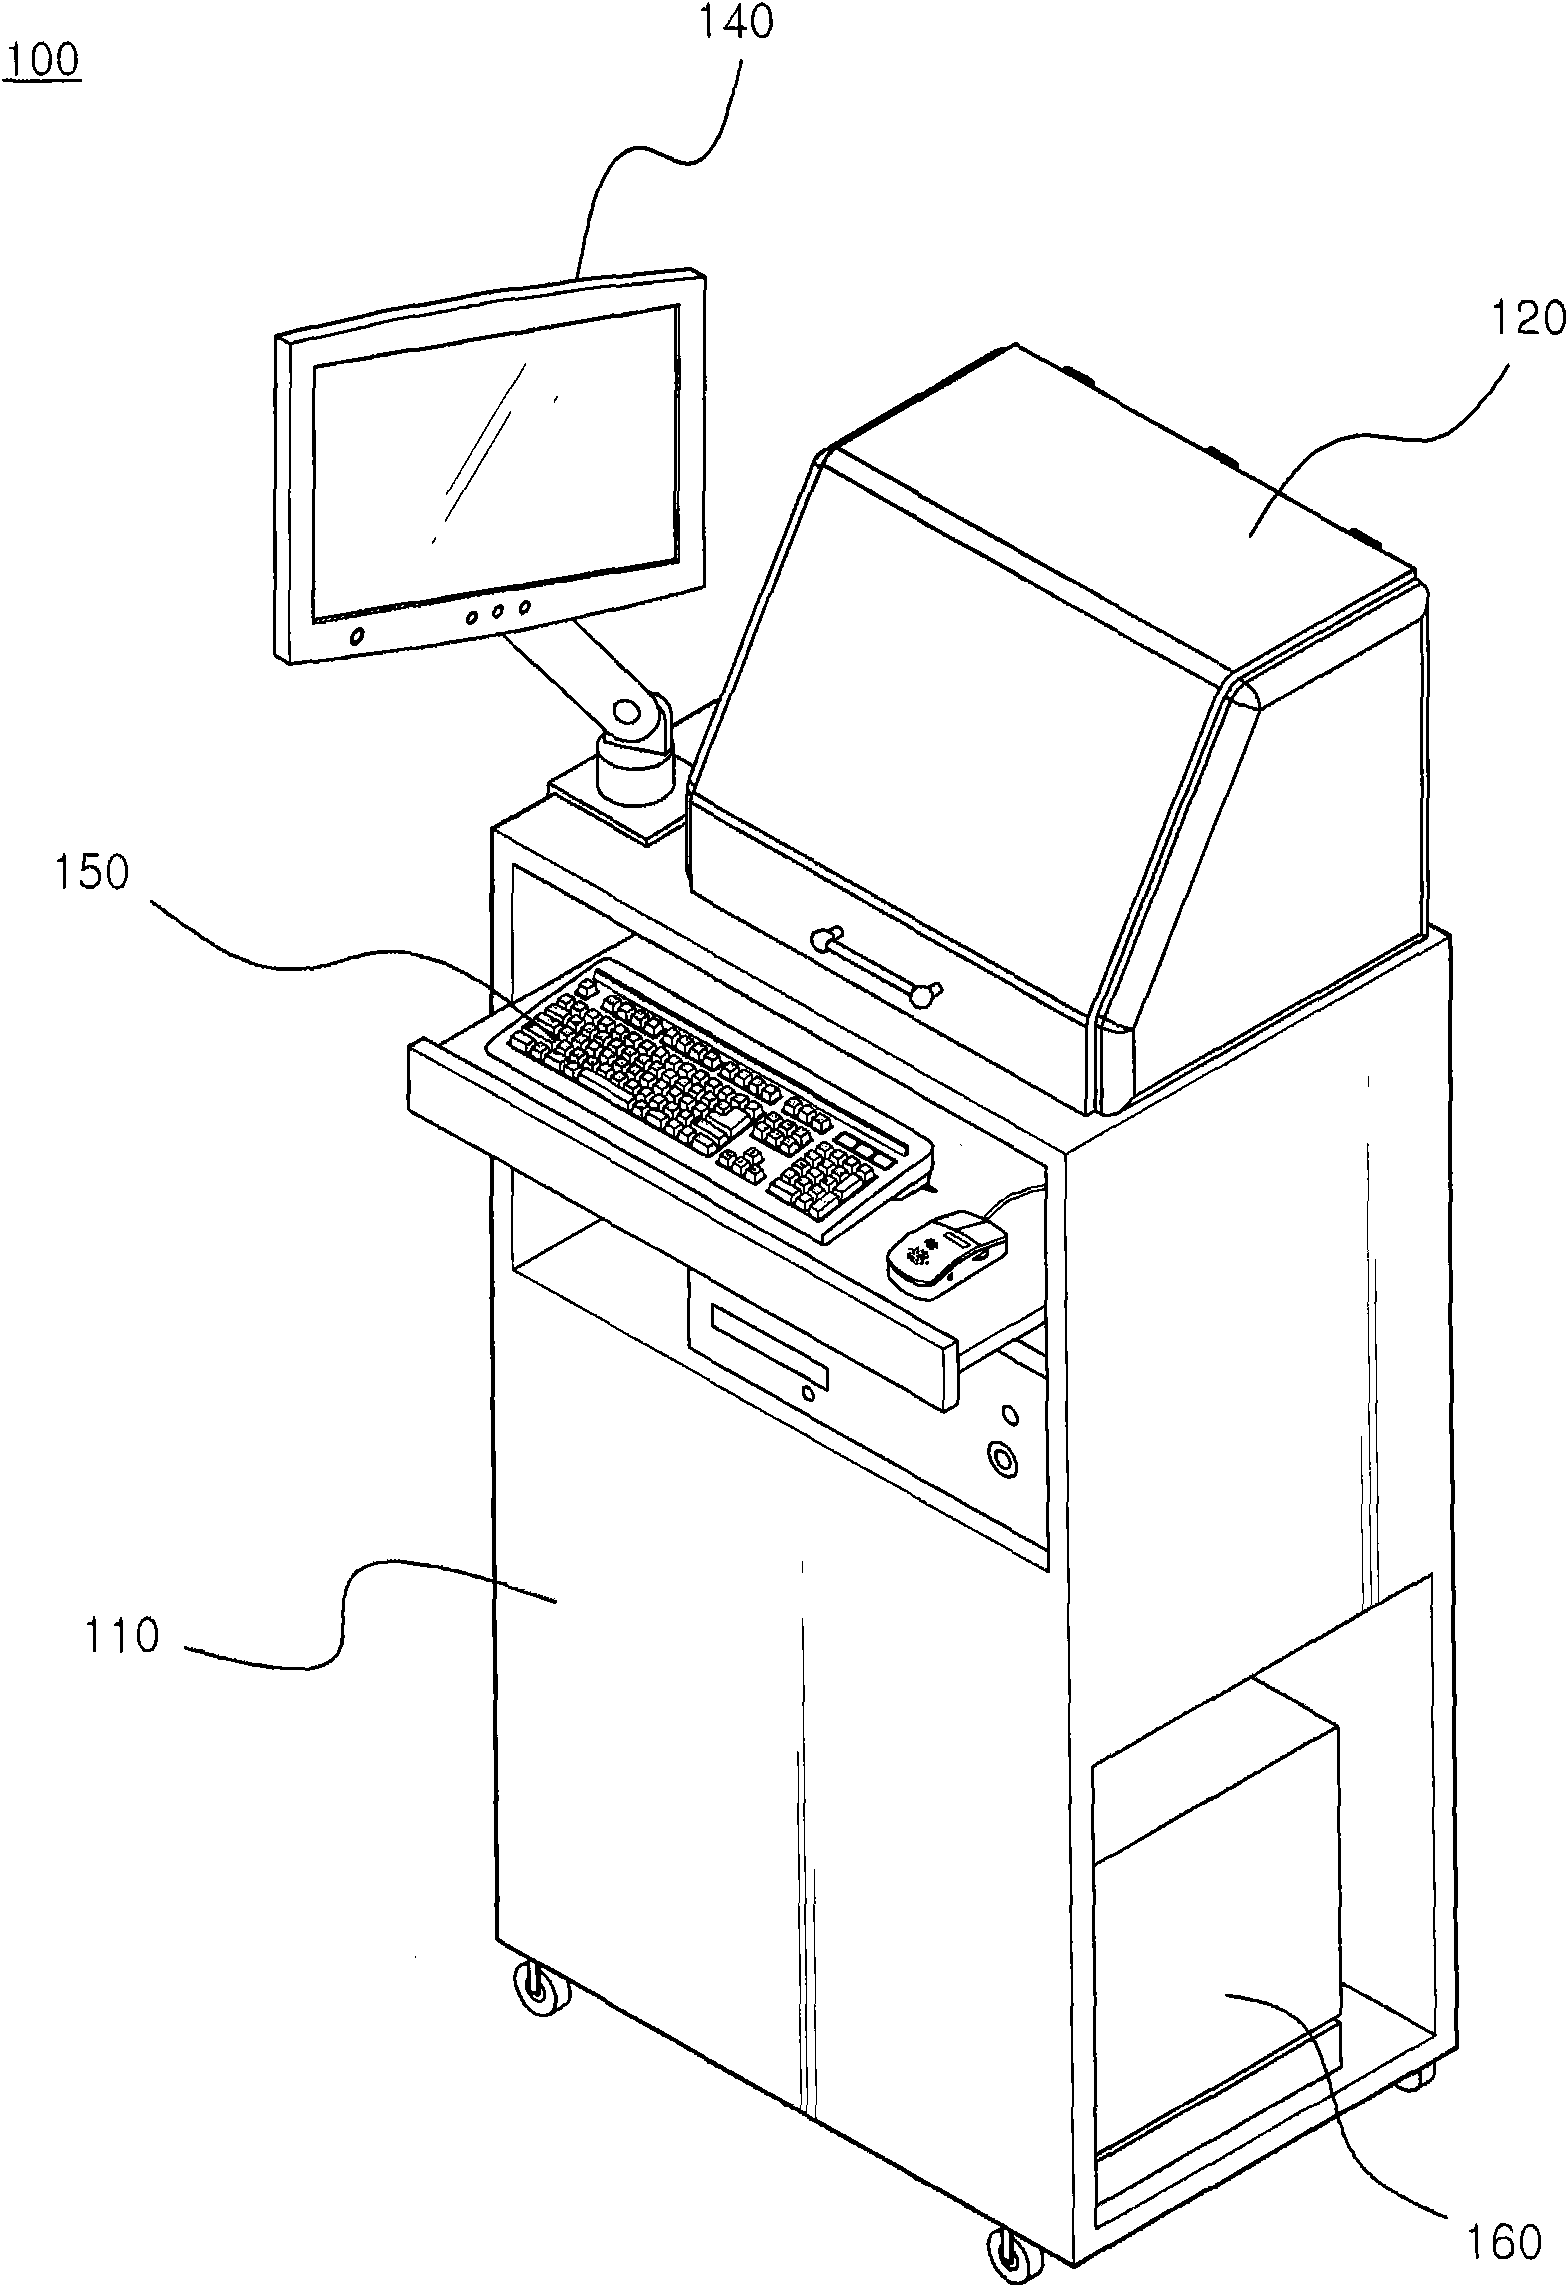 Device for automatically measuring viscosity of liquid